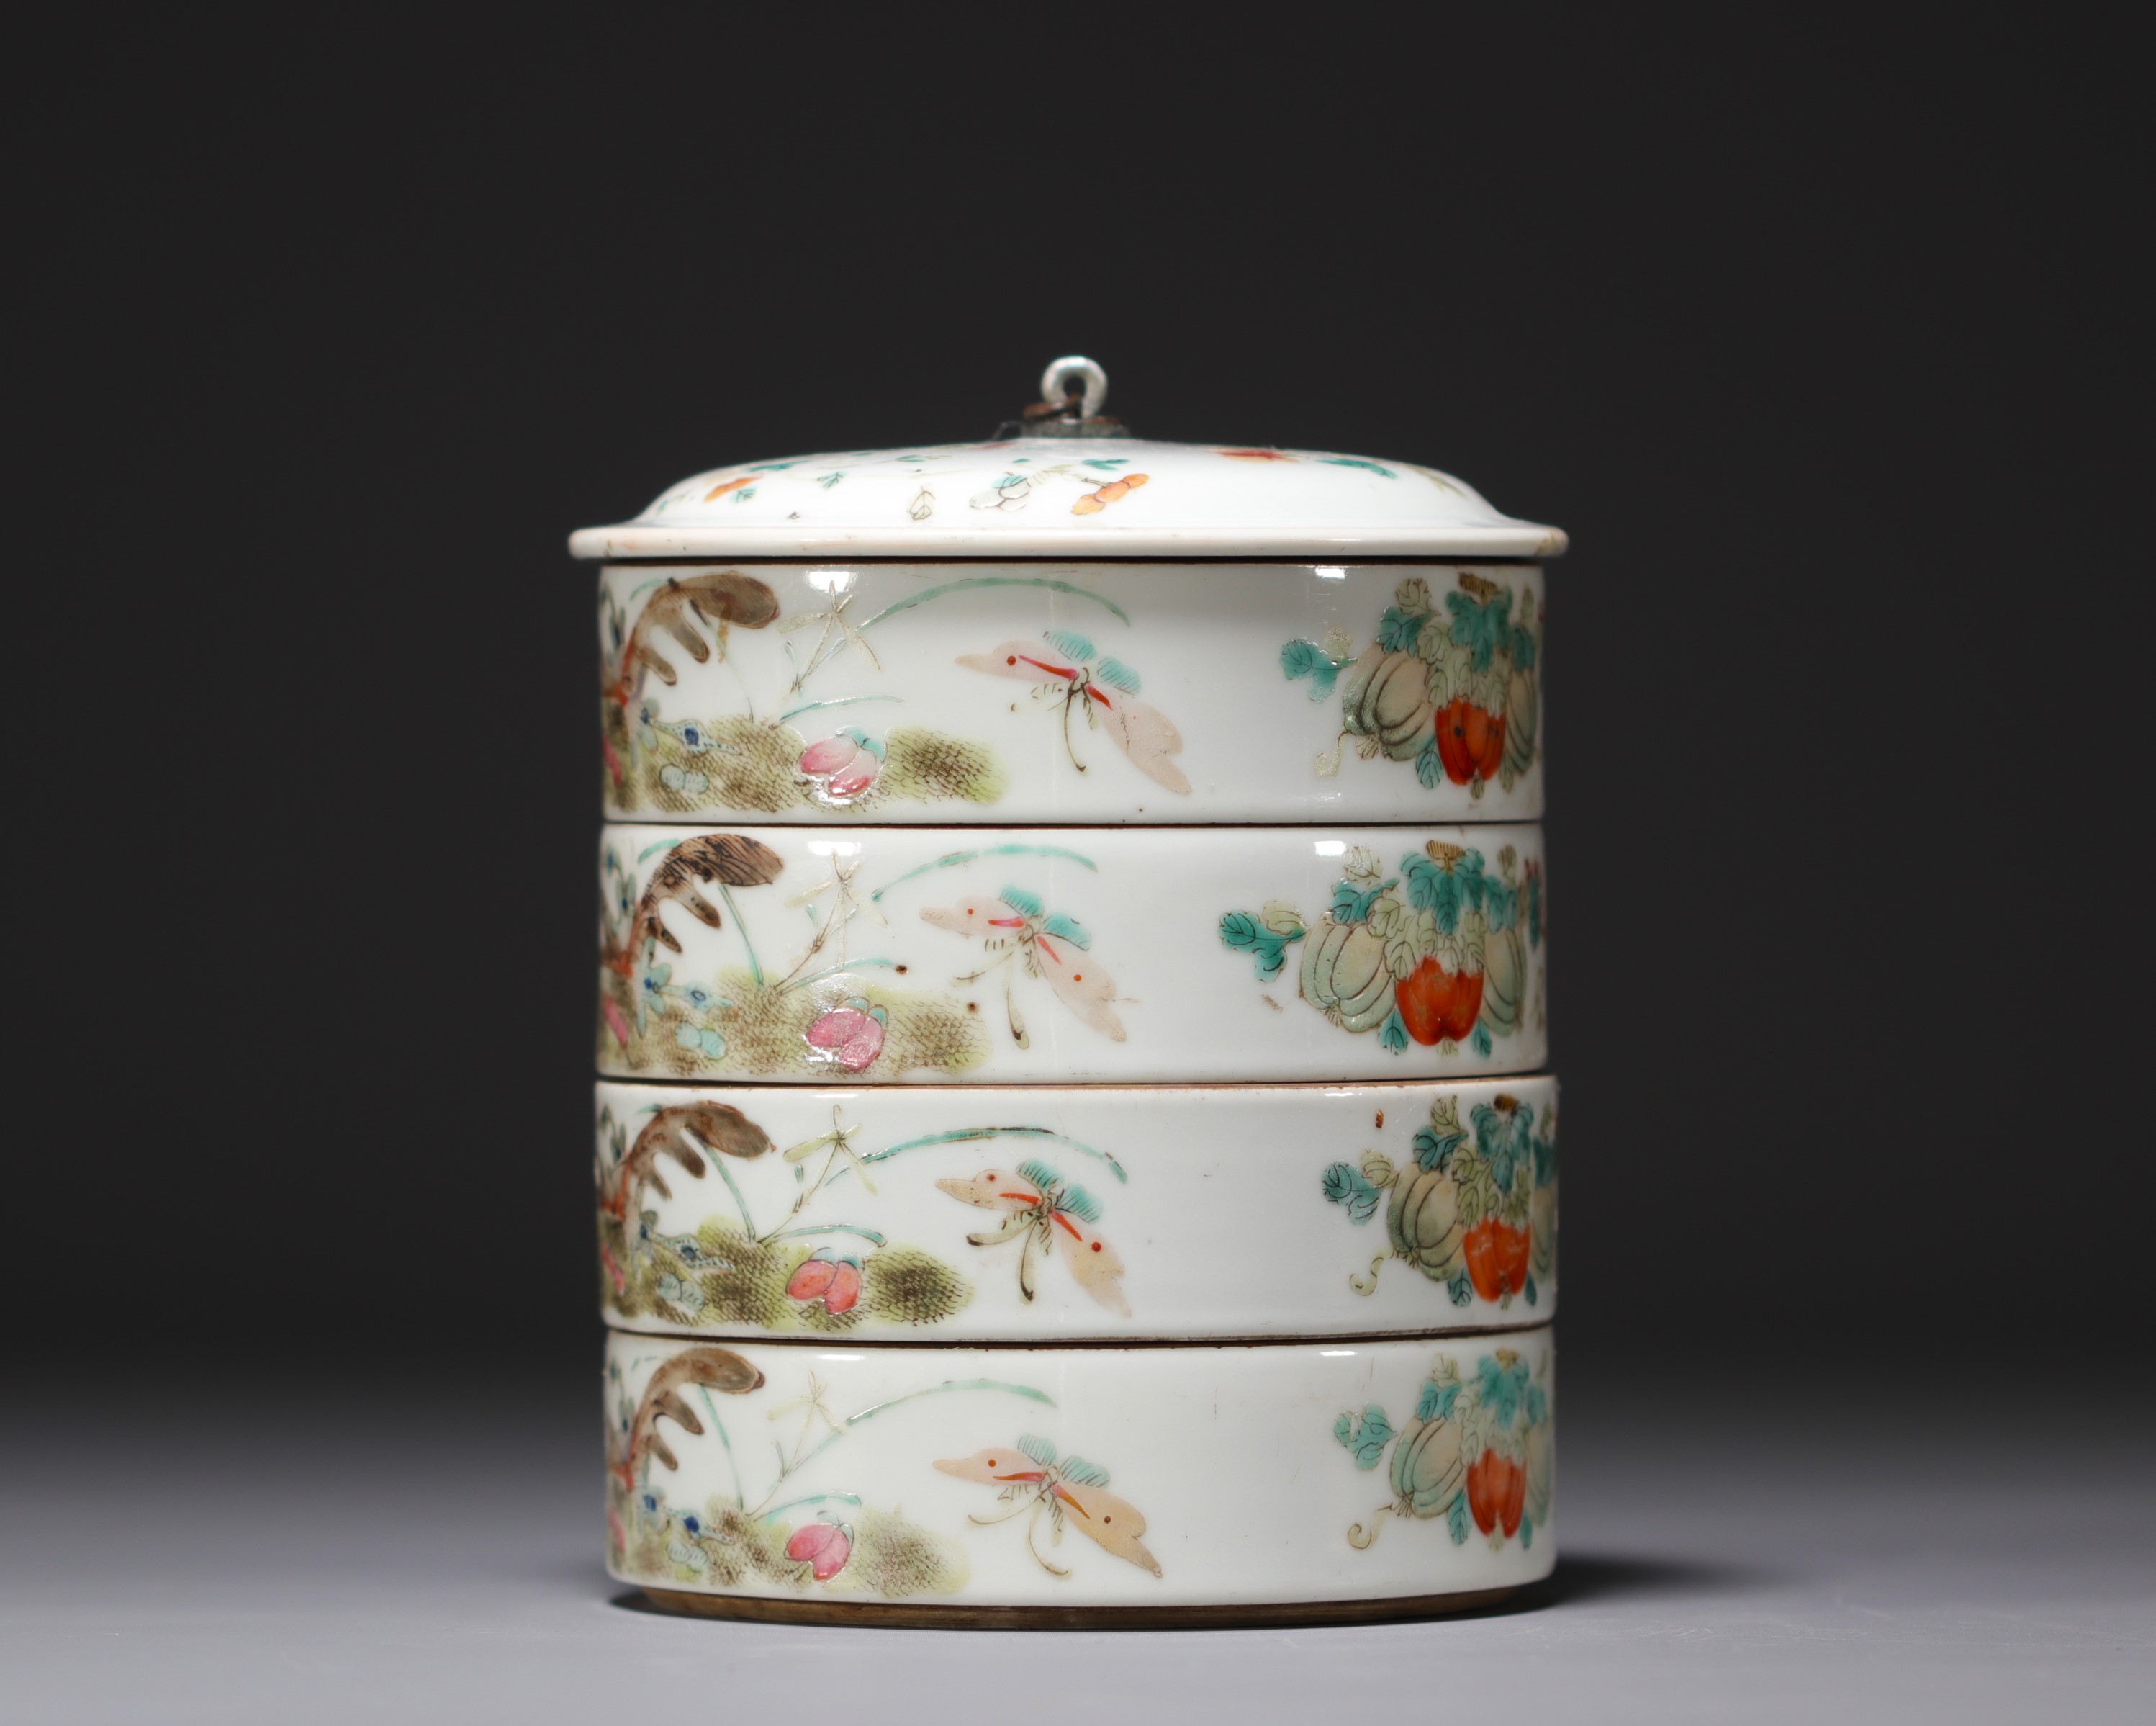 China - Set of four stacking condiment bowls decorated with flowers, famille rose. - Image 2 of 6